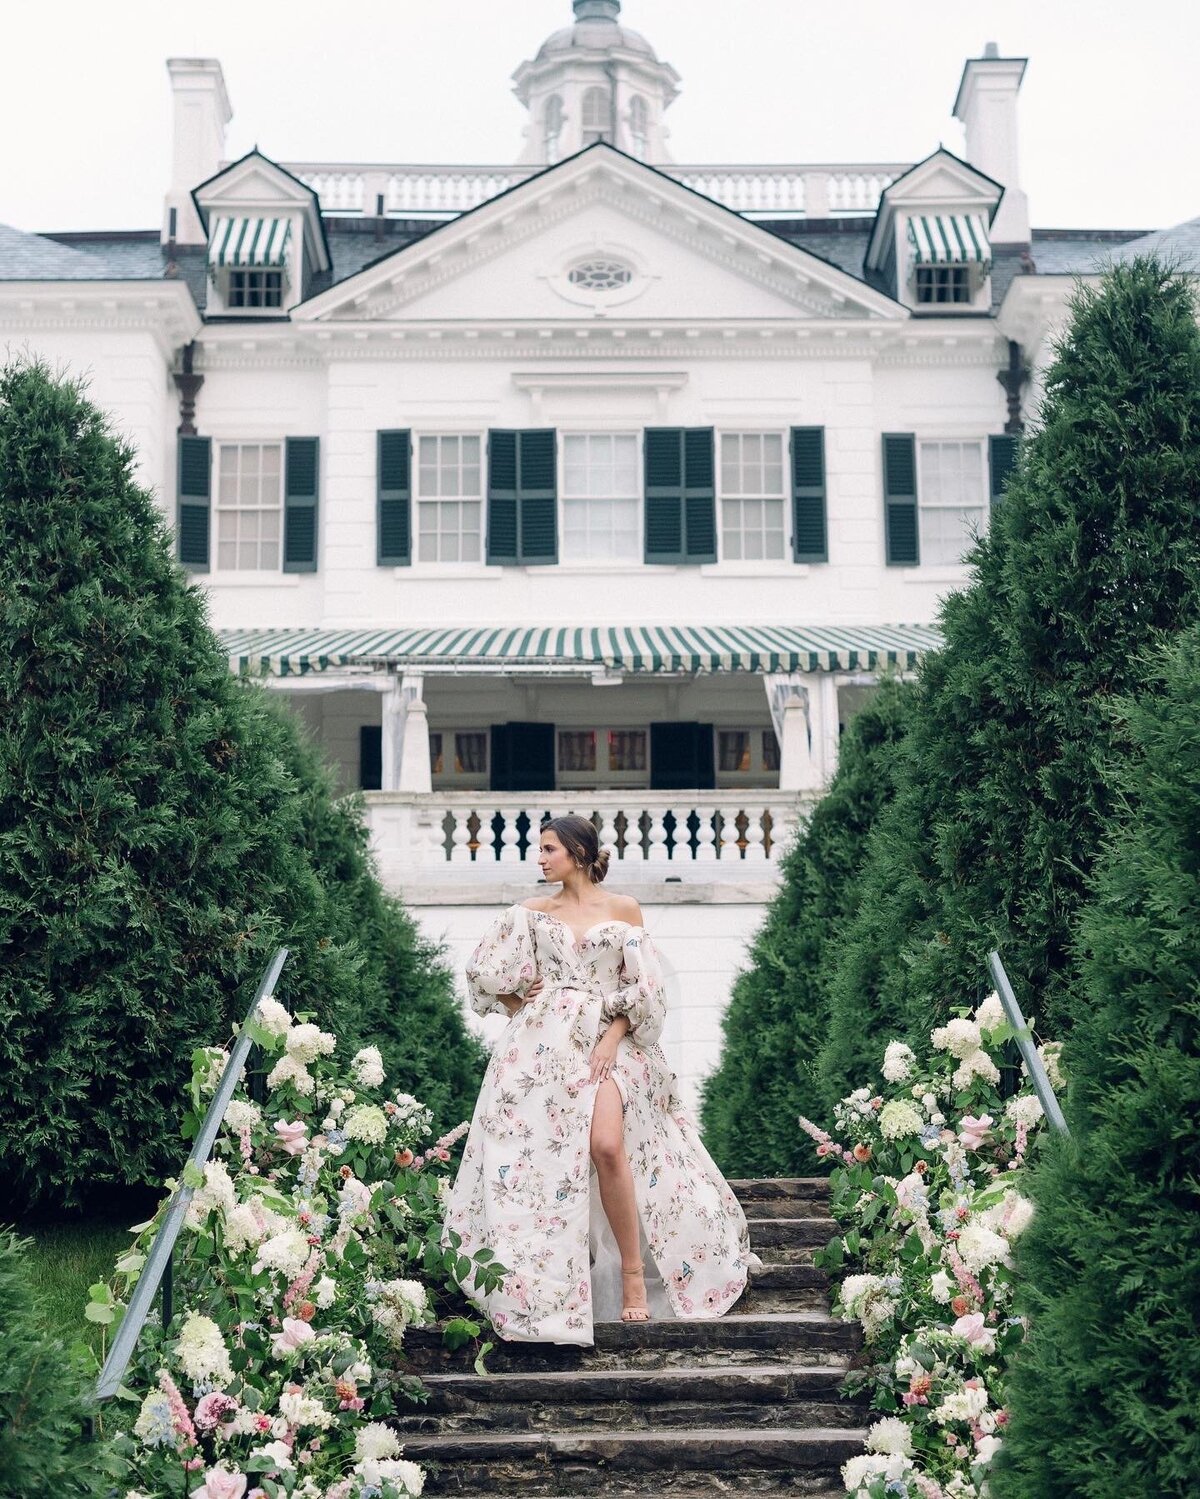 erica-renee-beauty-hair-and-makeup-duo-traveling-Berkshires-the-mount-Lenox-modern-bride-slit-puff-sleeves-low-chignon-romantic-floral-gown